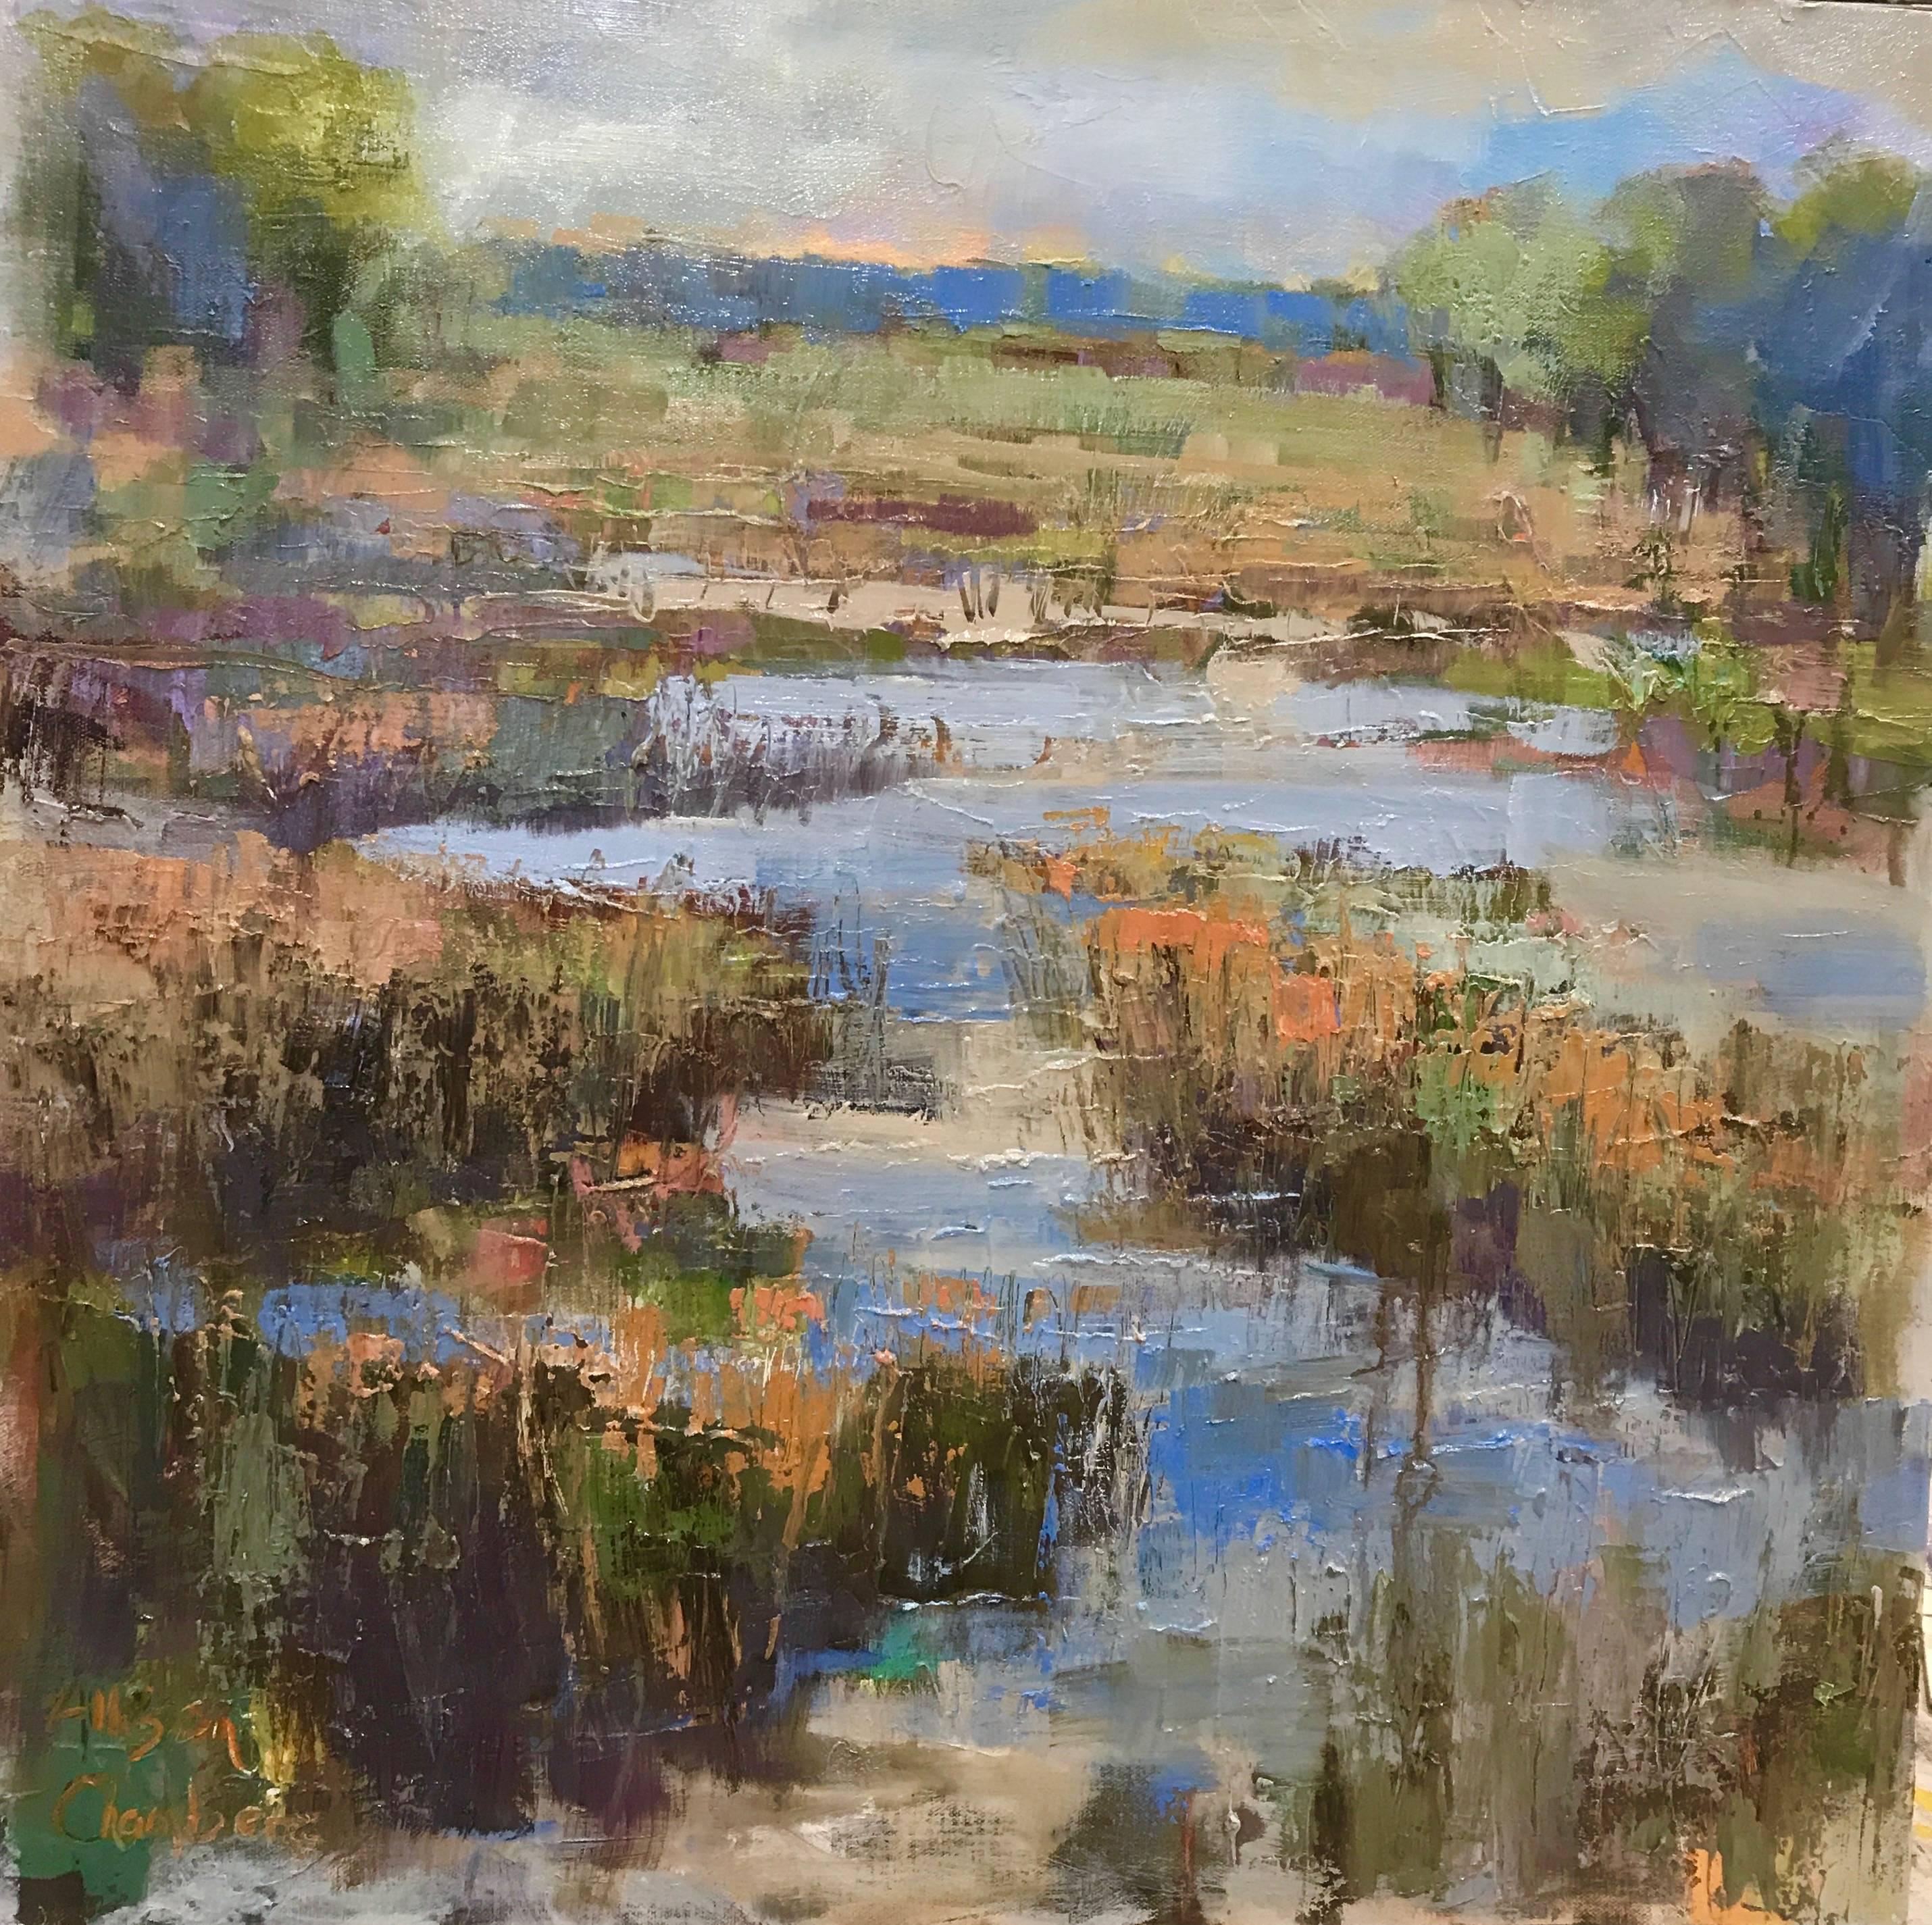 We’re drawn to Allison’s softly rendered and beautifully painted landscapes and waterscapes that capture light, depth and the constantly shifting movement of water, flora and fauna.  Her impasto technique incorporates the texture that only comes